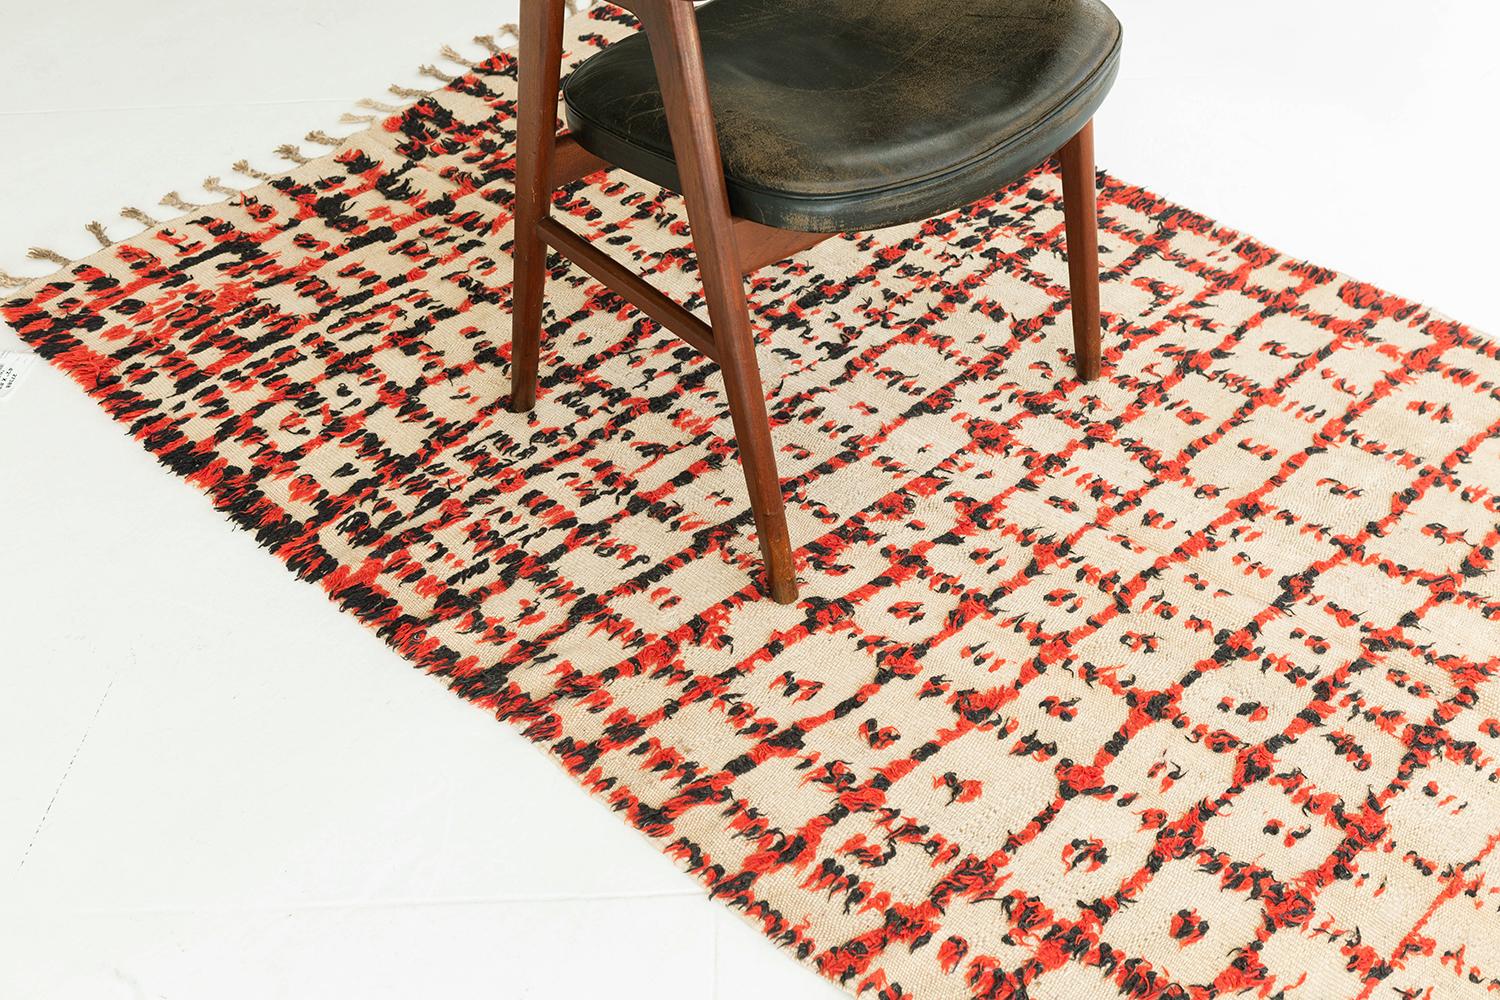 Natural ivory flatweave field with an artfully irregular grid design rendered in eye-catching red and black knots. A unique piece combining graphical and textural interest. A unique vintage tribal rug from the Atlas Mountains of Morocco.

Rug